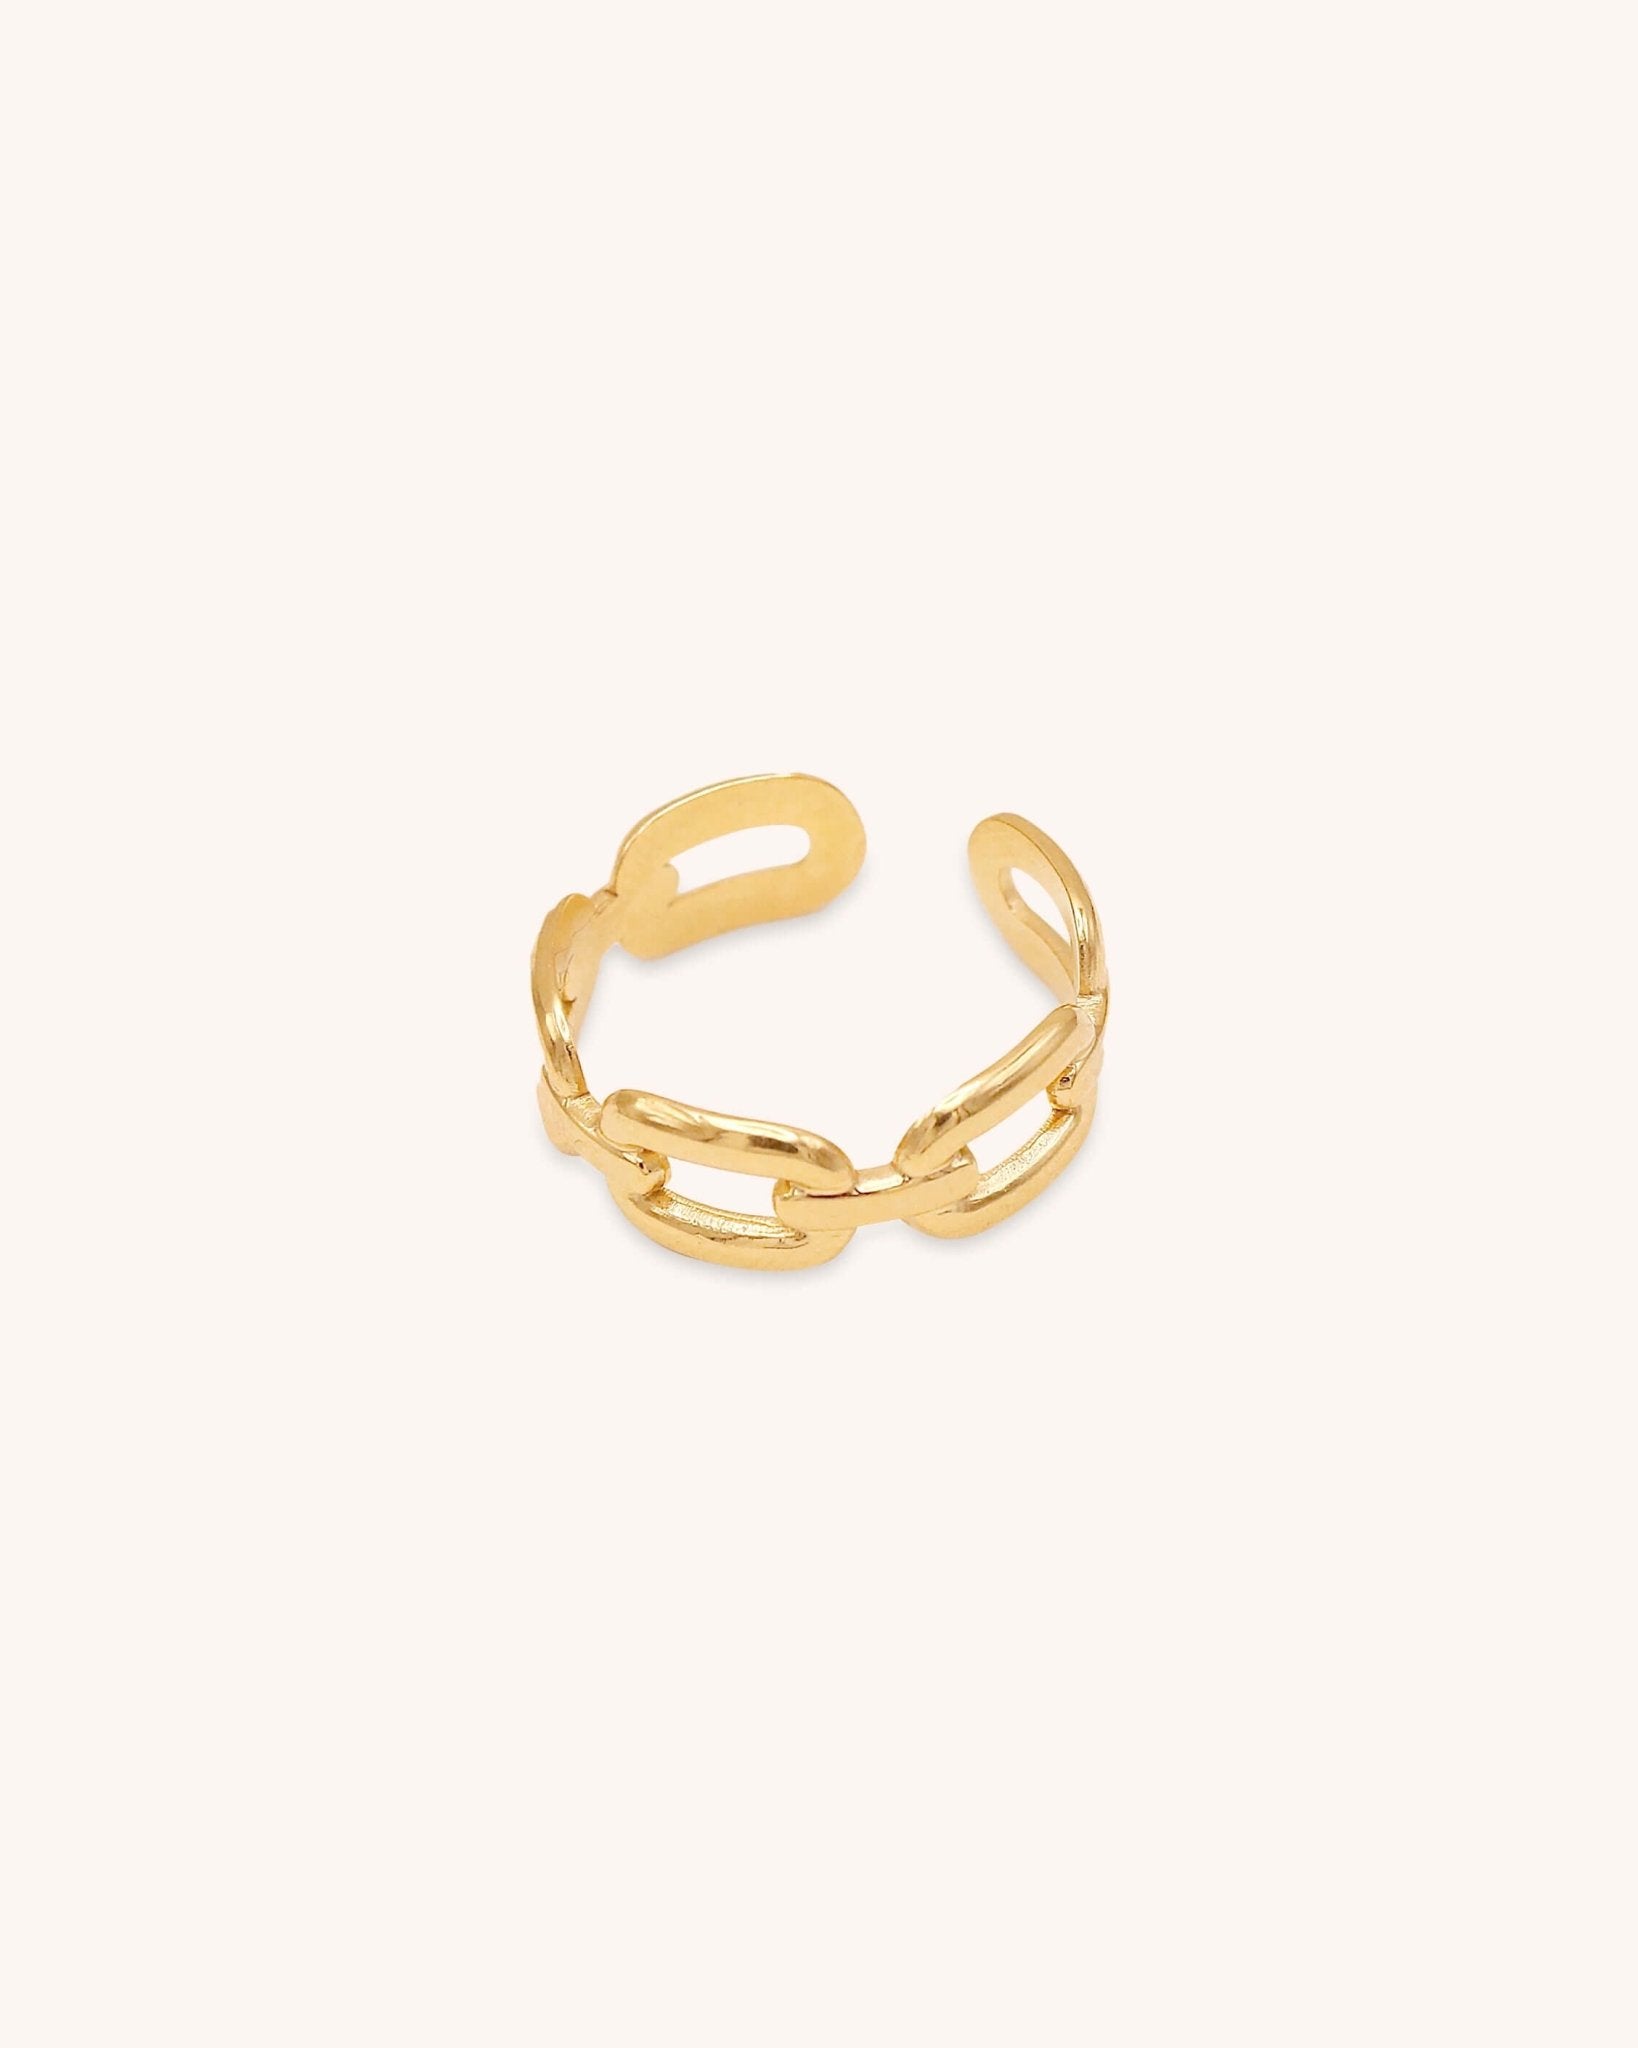 Chain Adjustable Ring | Stainless Steel - Oia Boutique